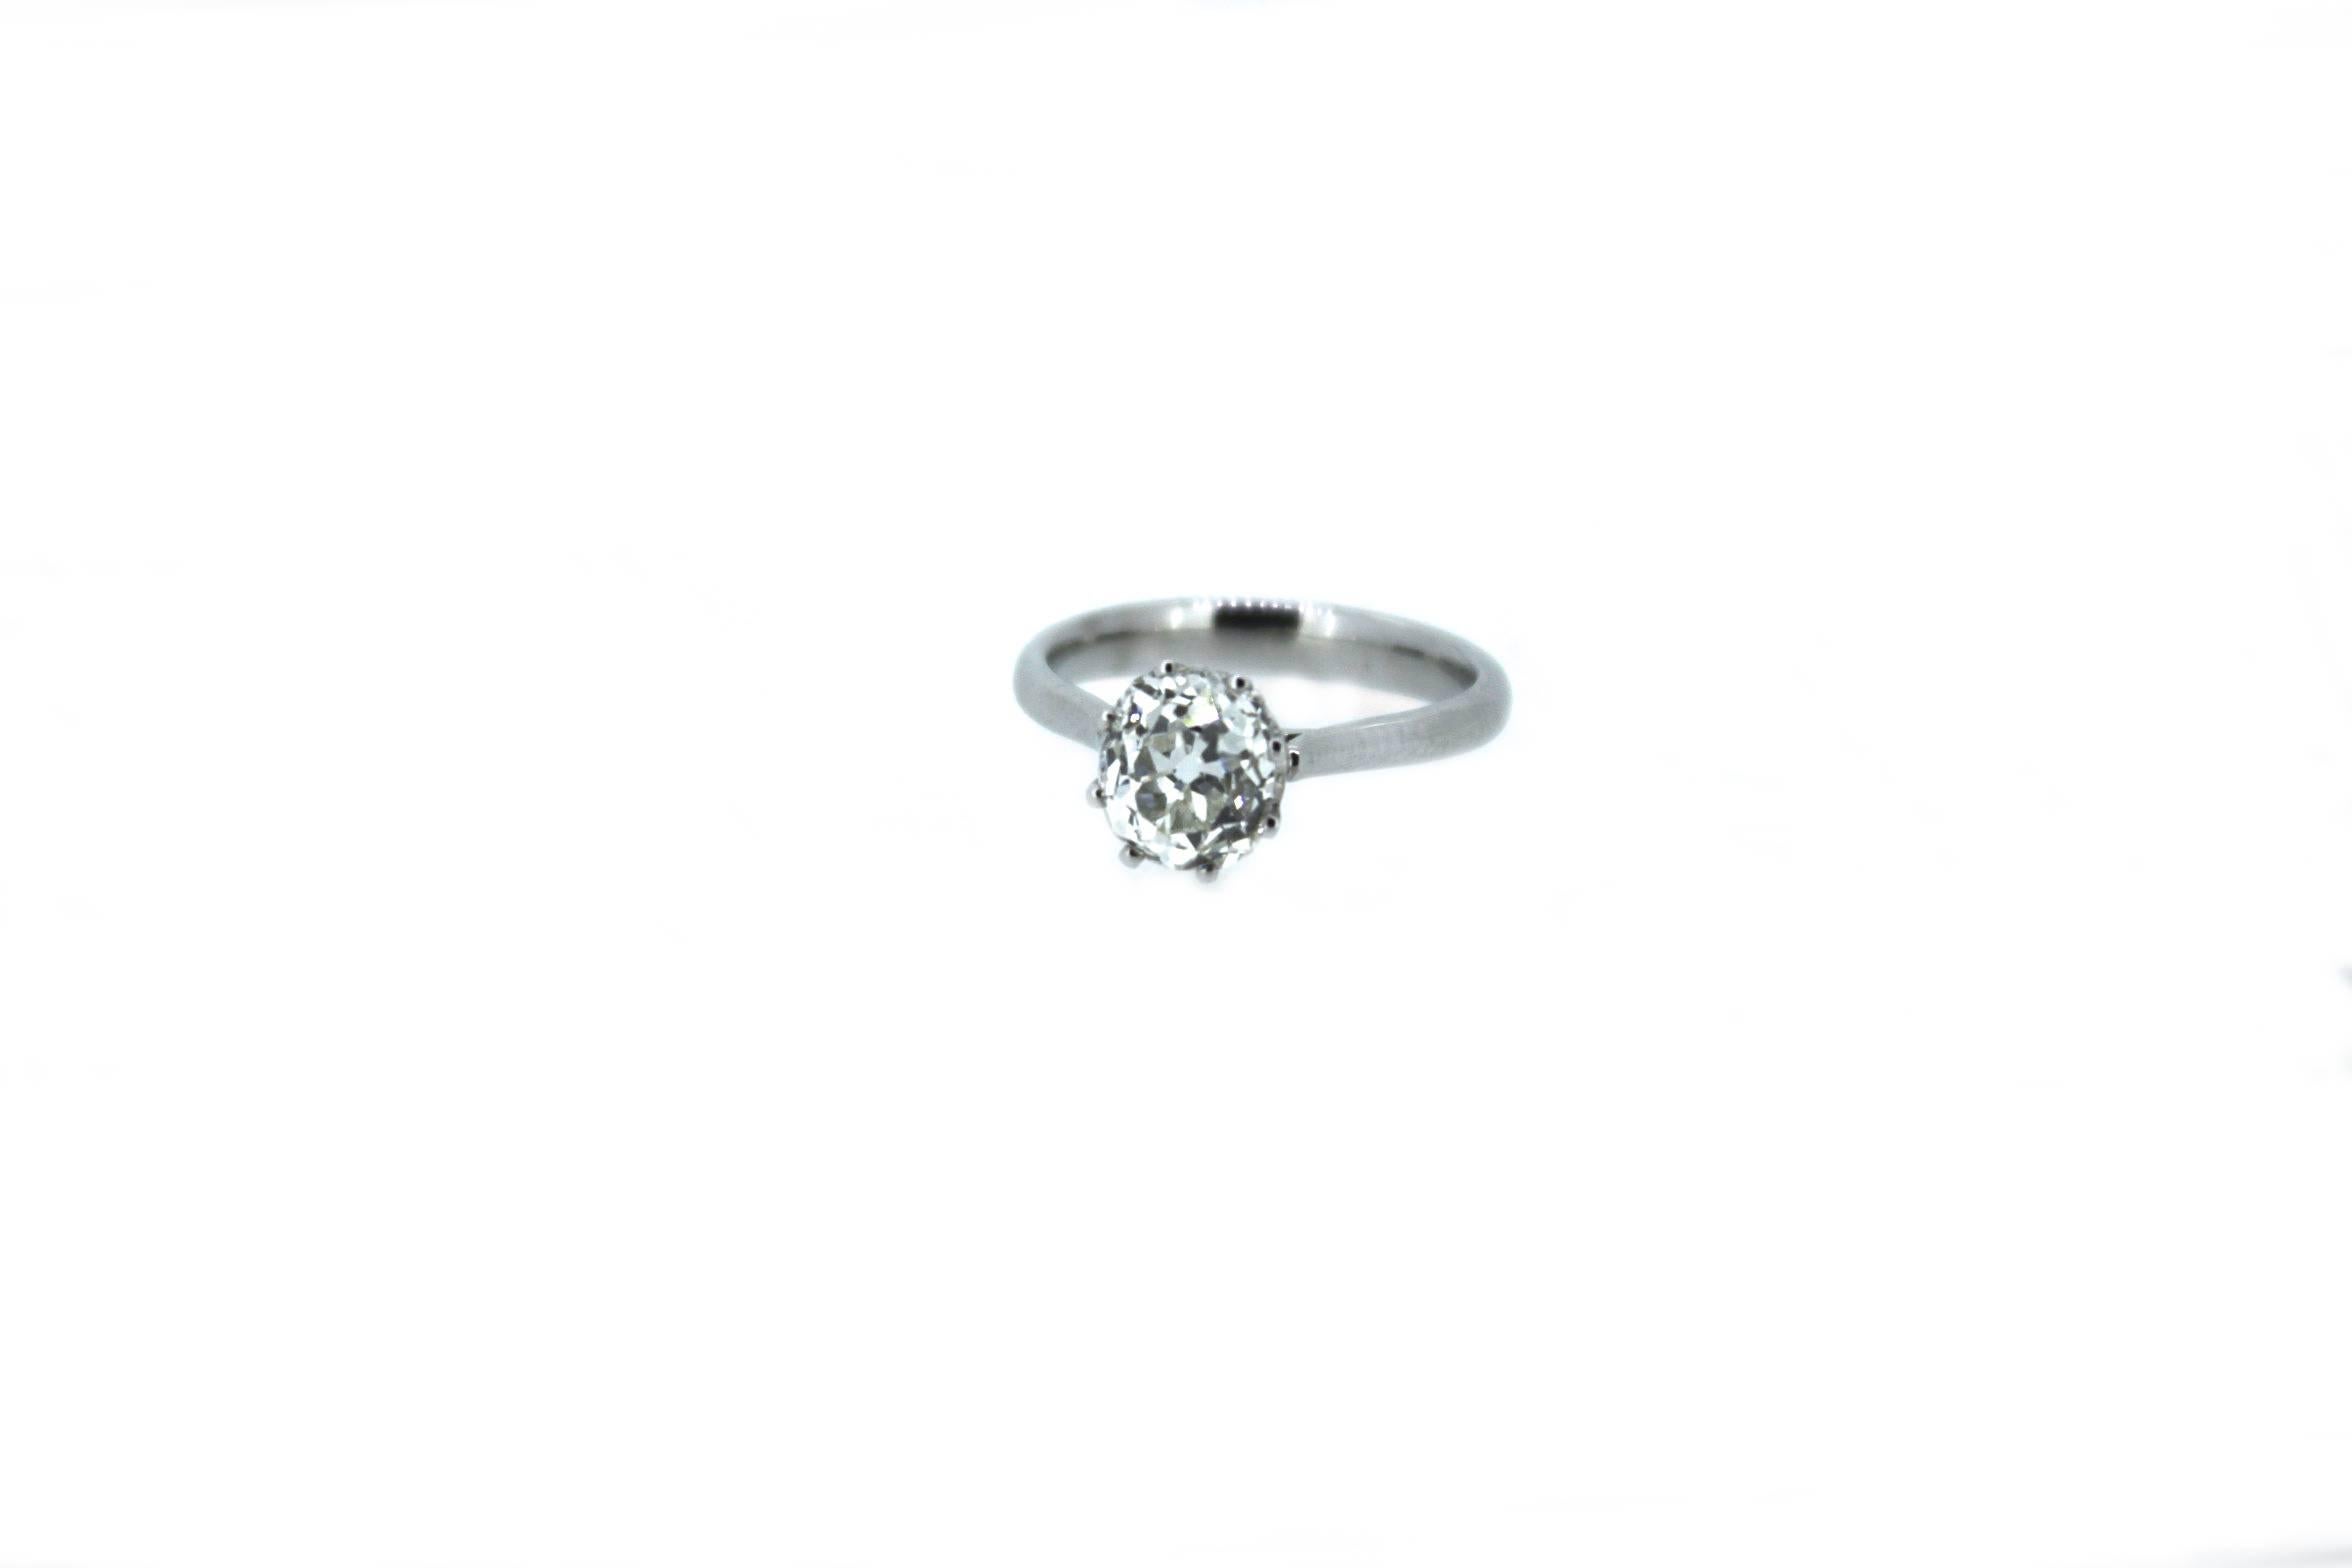 Women's 2.14 Carat Old Cut Solitaire Diamond Ring For Sale